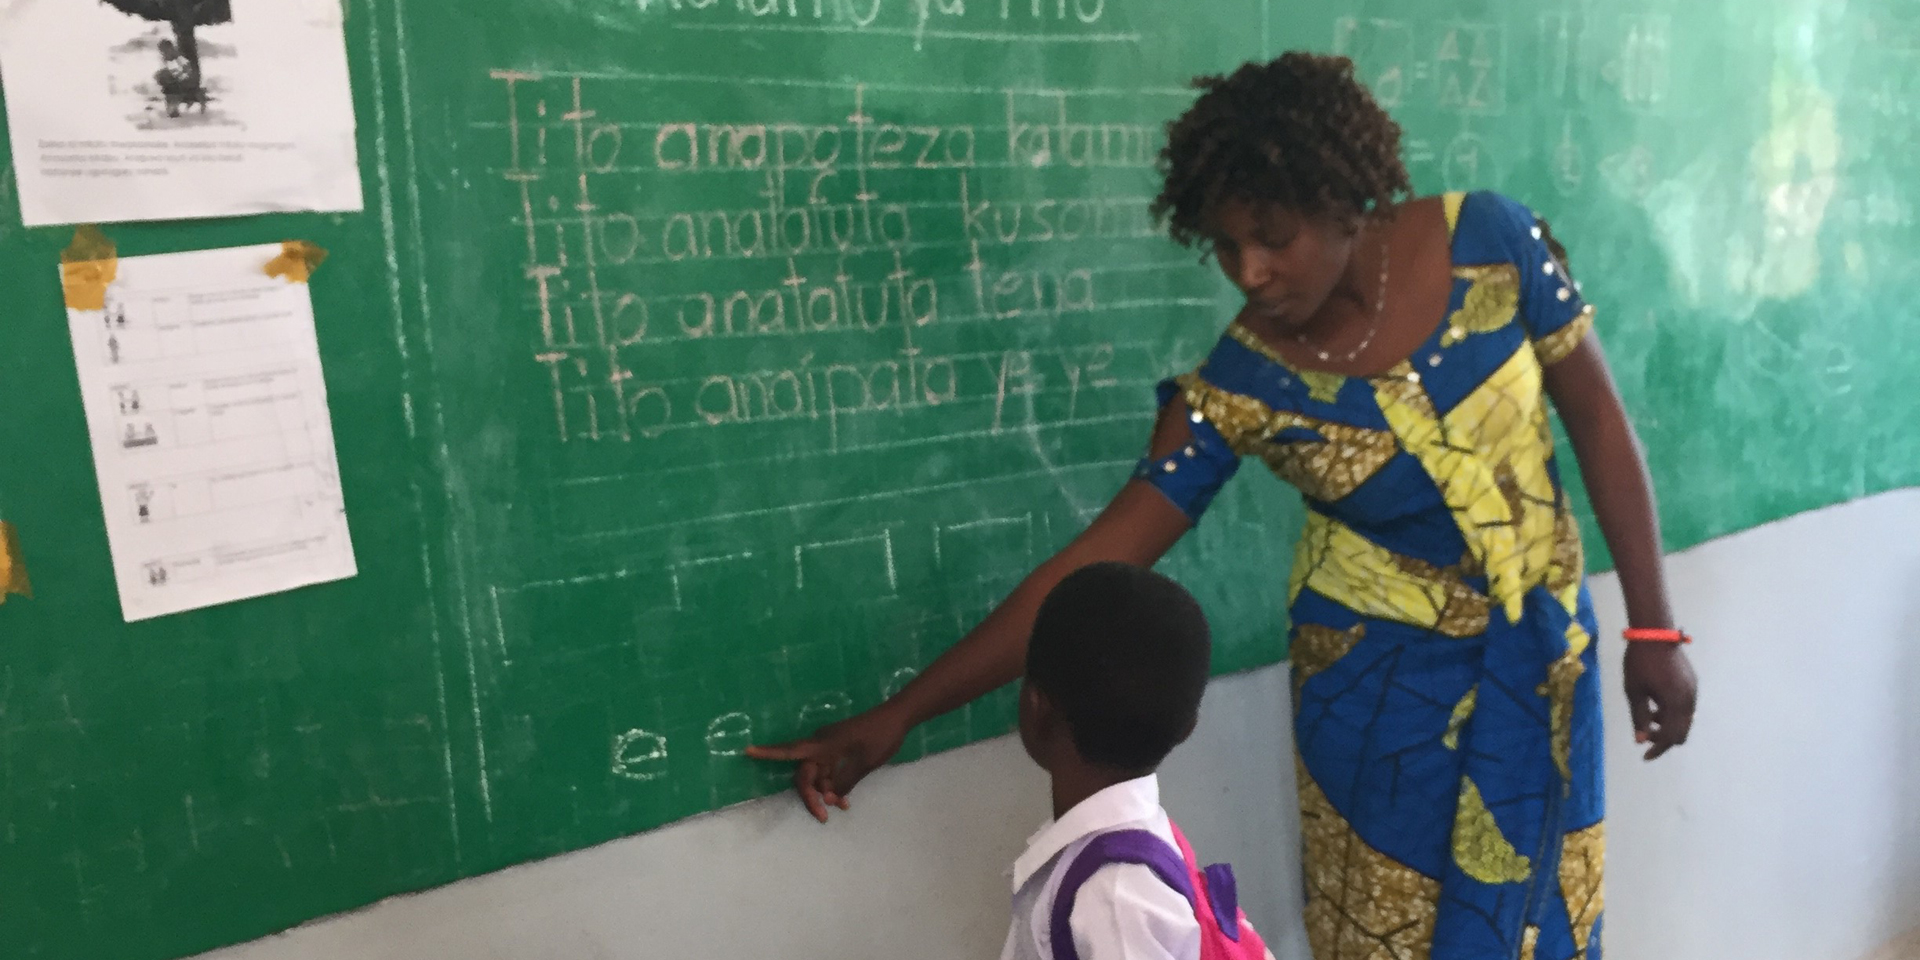 Image of a teacher pointing out a letter on a blackboard to a young student beside her.